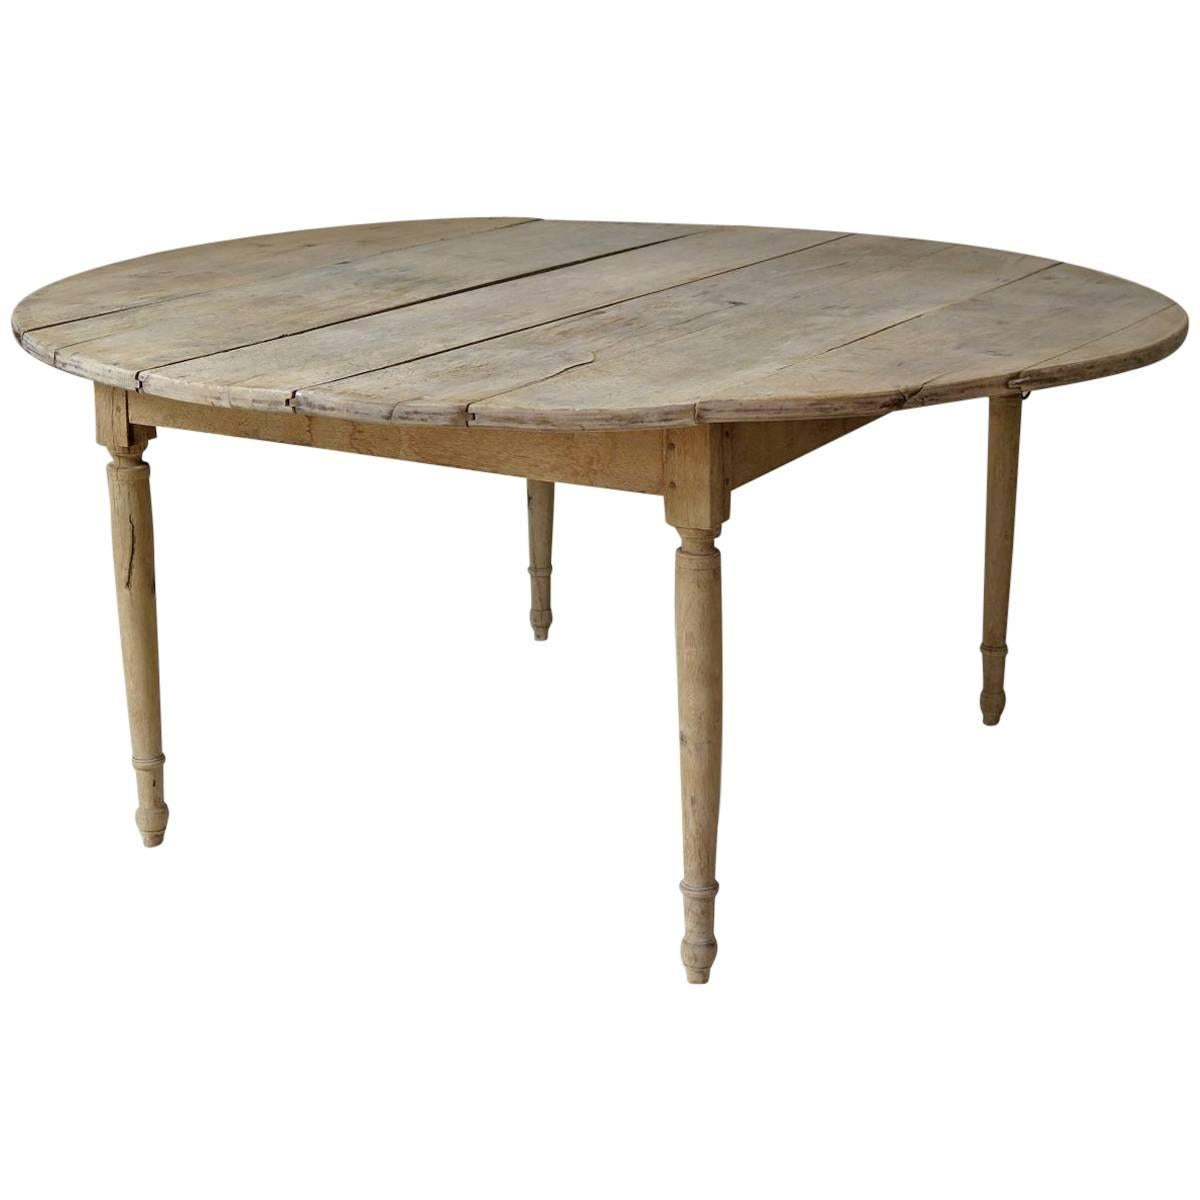 Large Round 19th Century Drop-Leaf Oak Dining Table from France